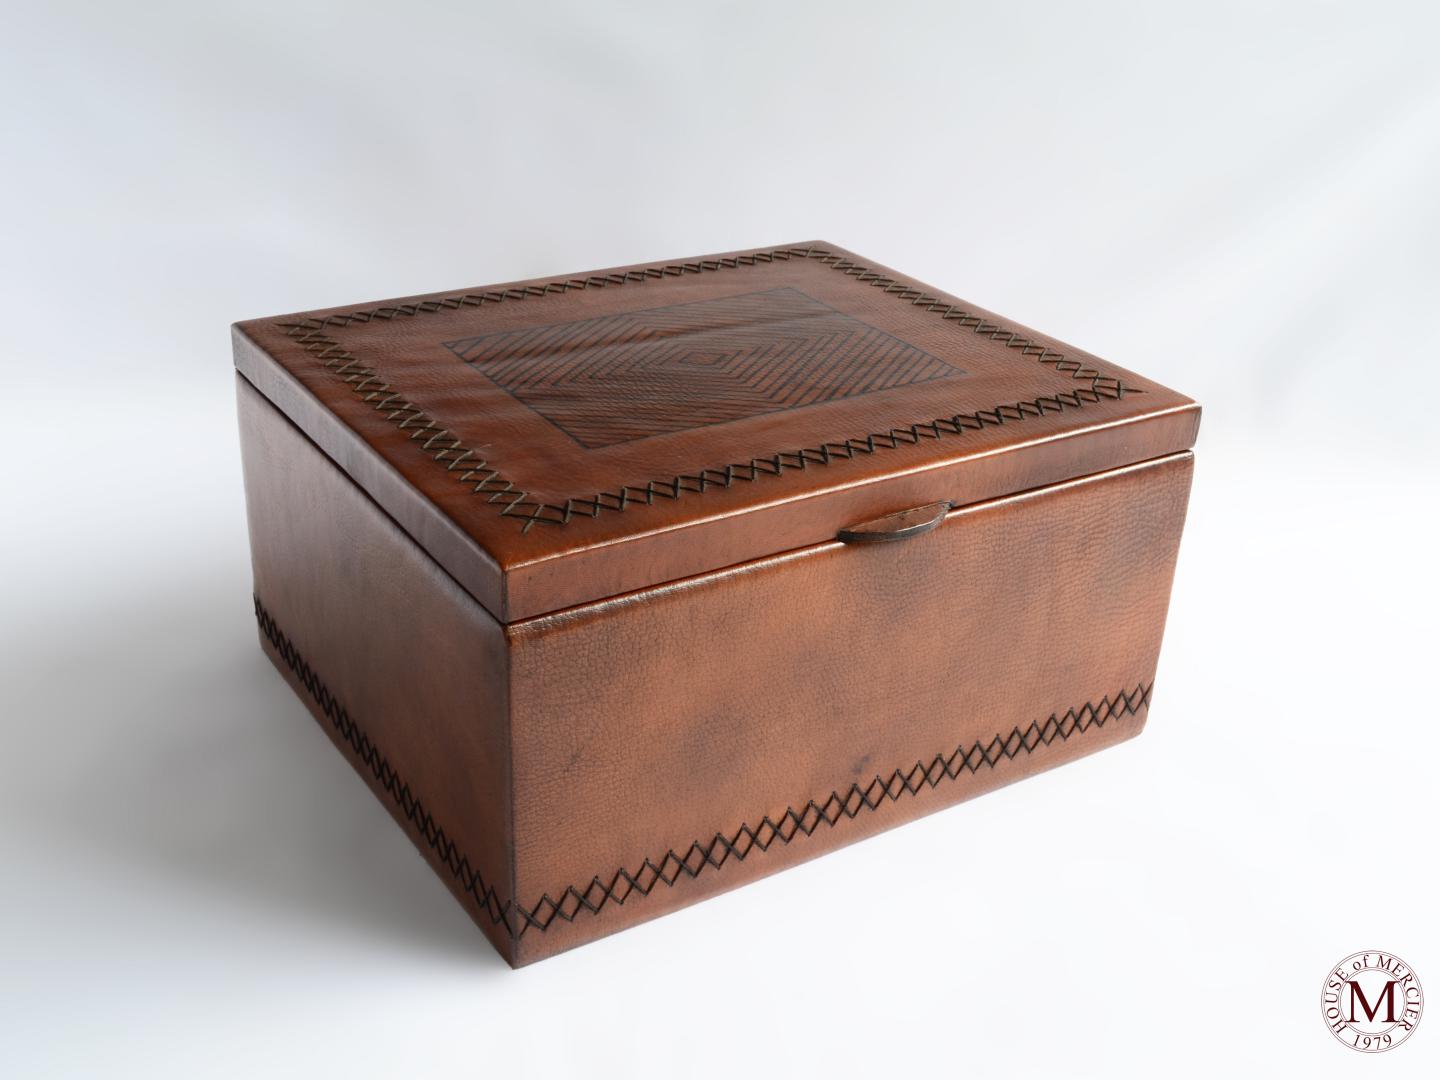 leather box with a sewed around the box and a tribal design on top